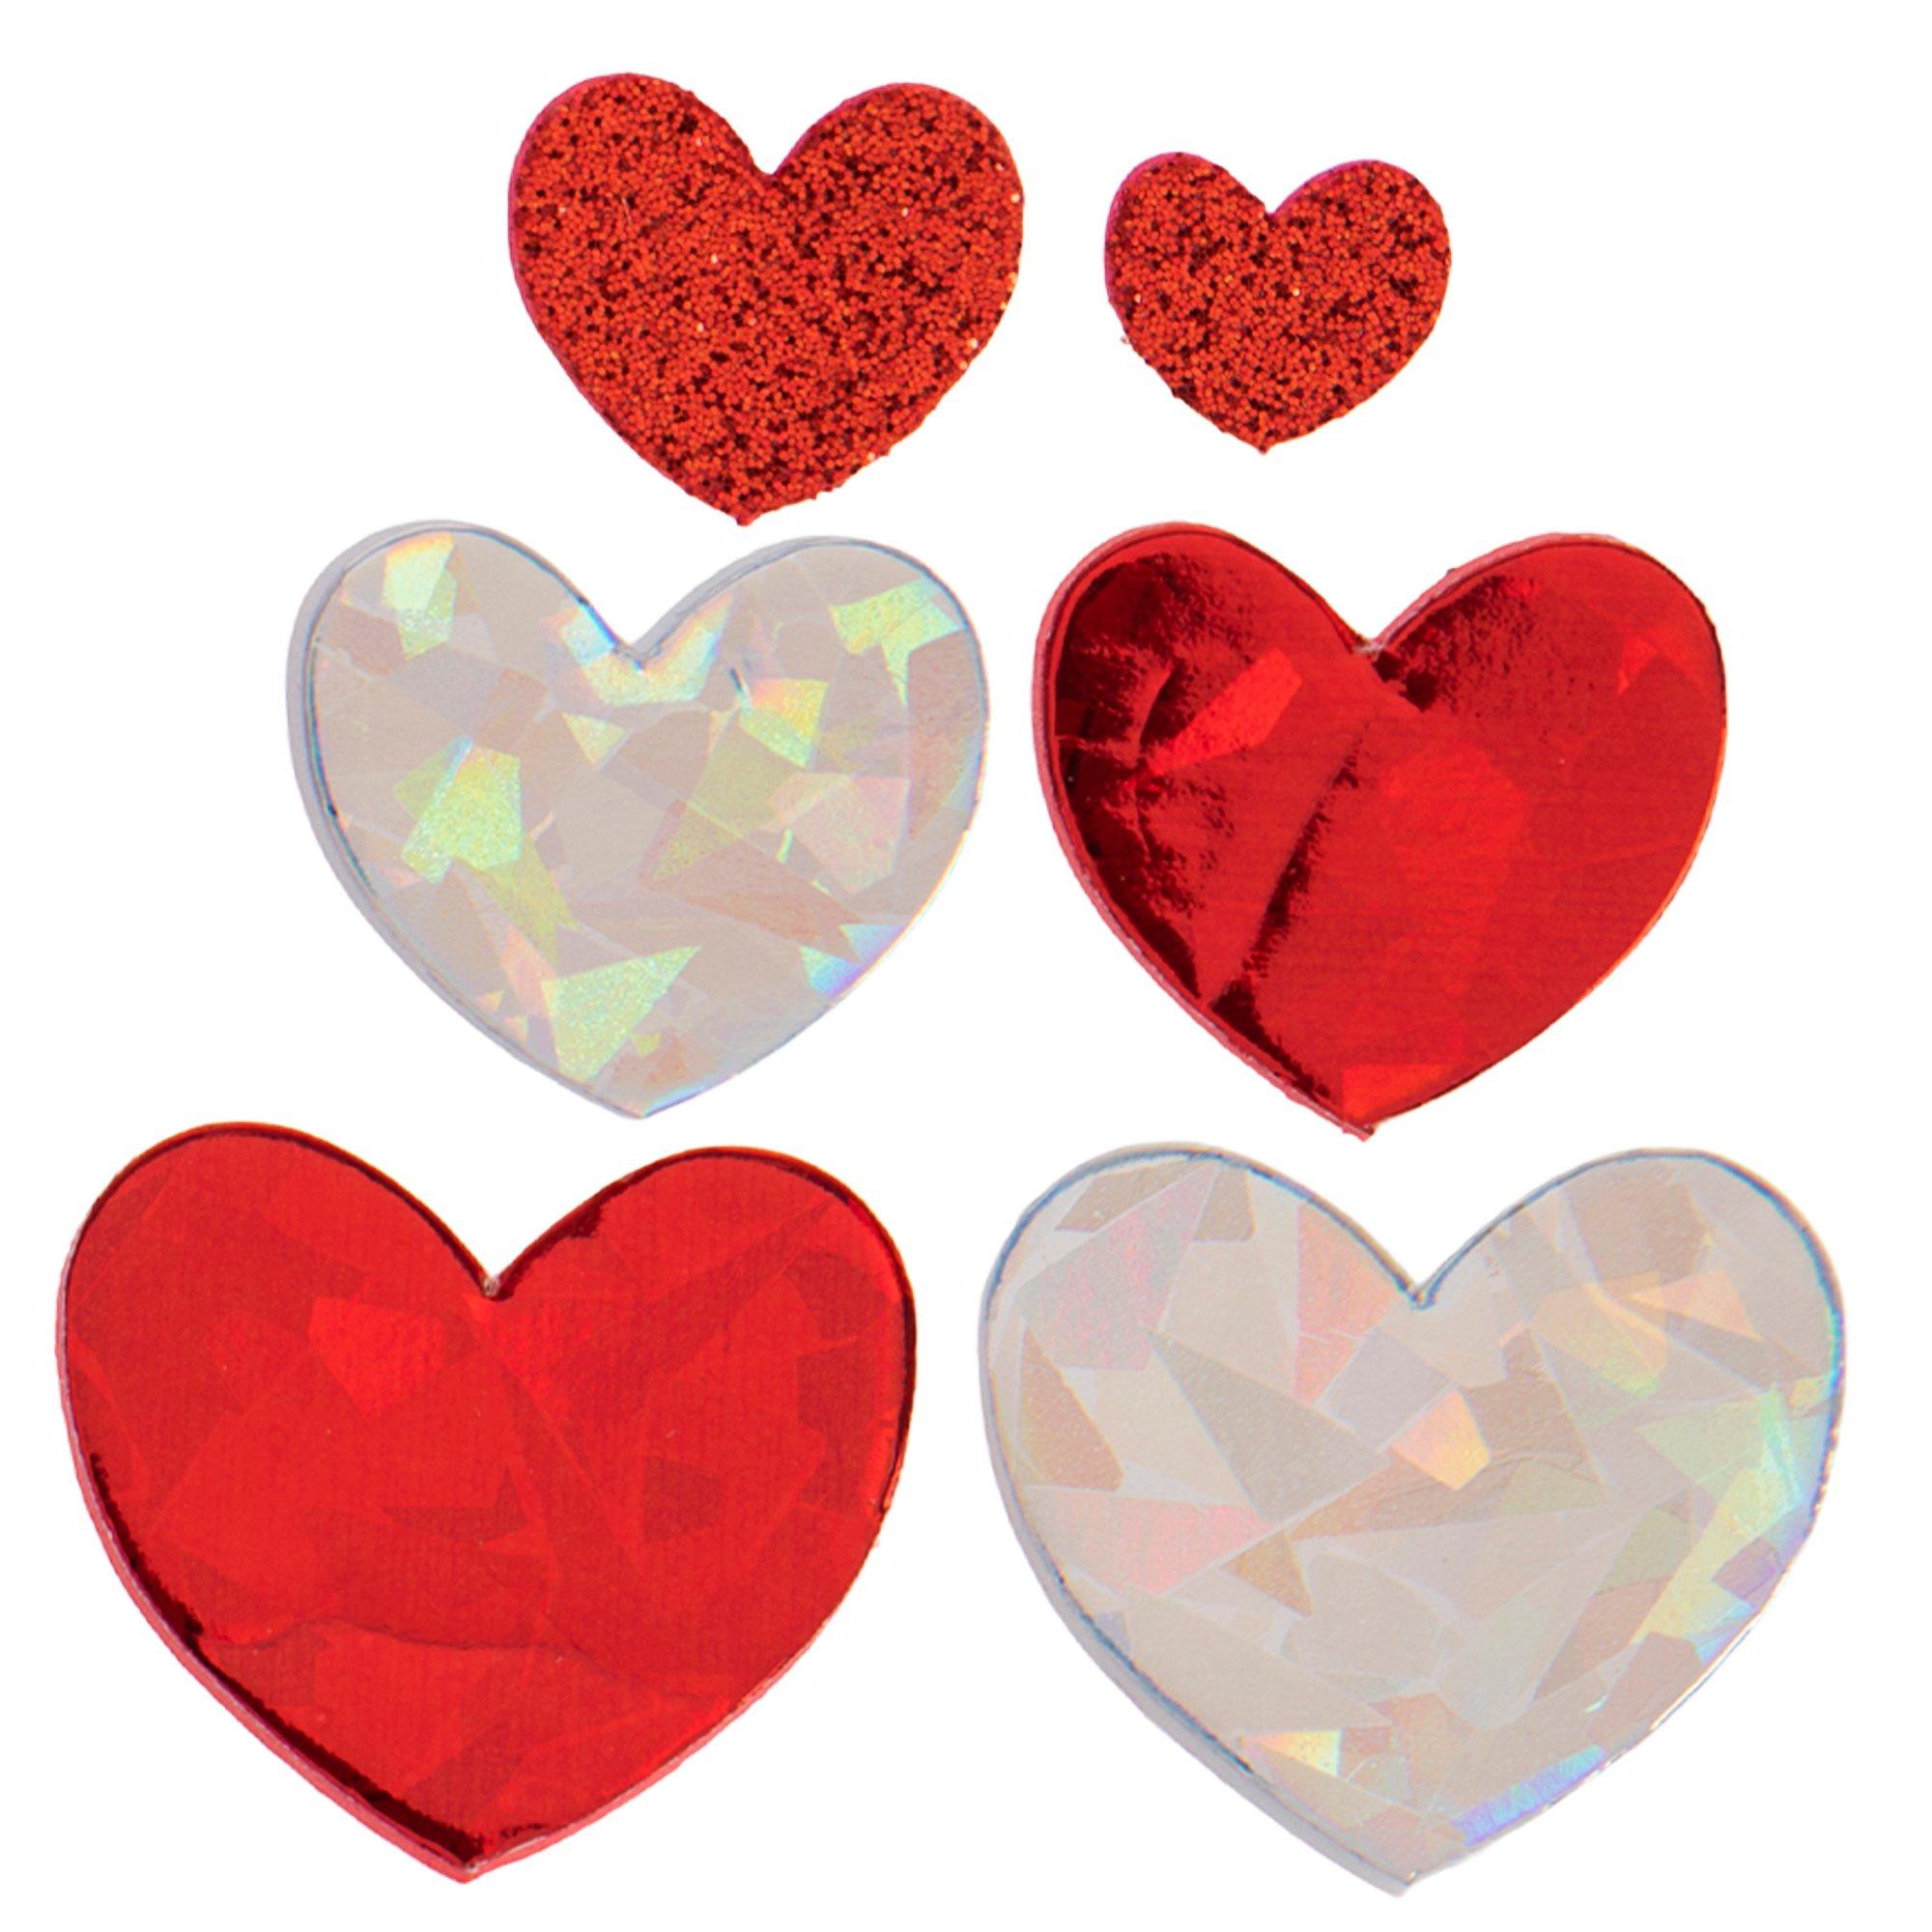 POP! Foam Hearts Solid And Glitter by POP!